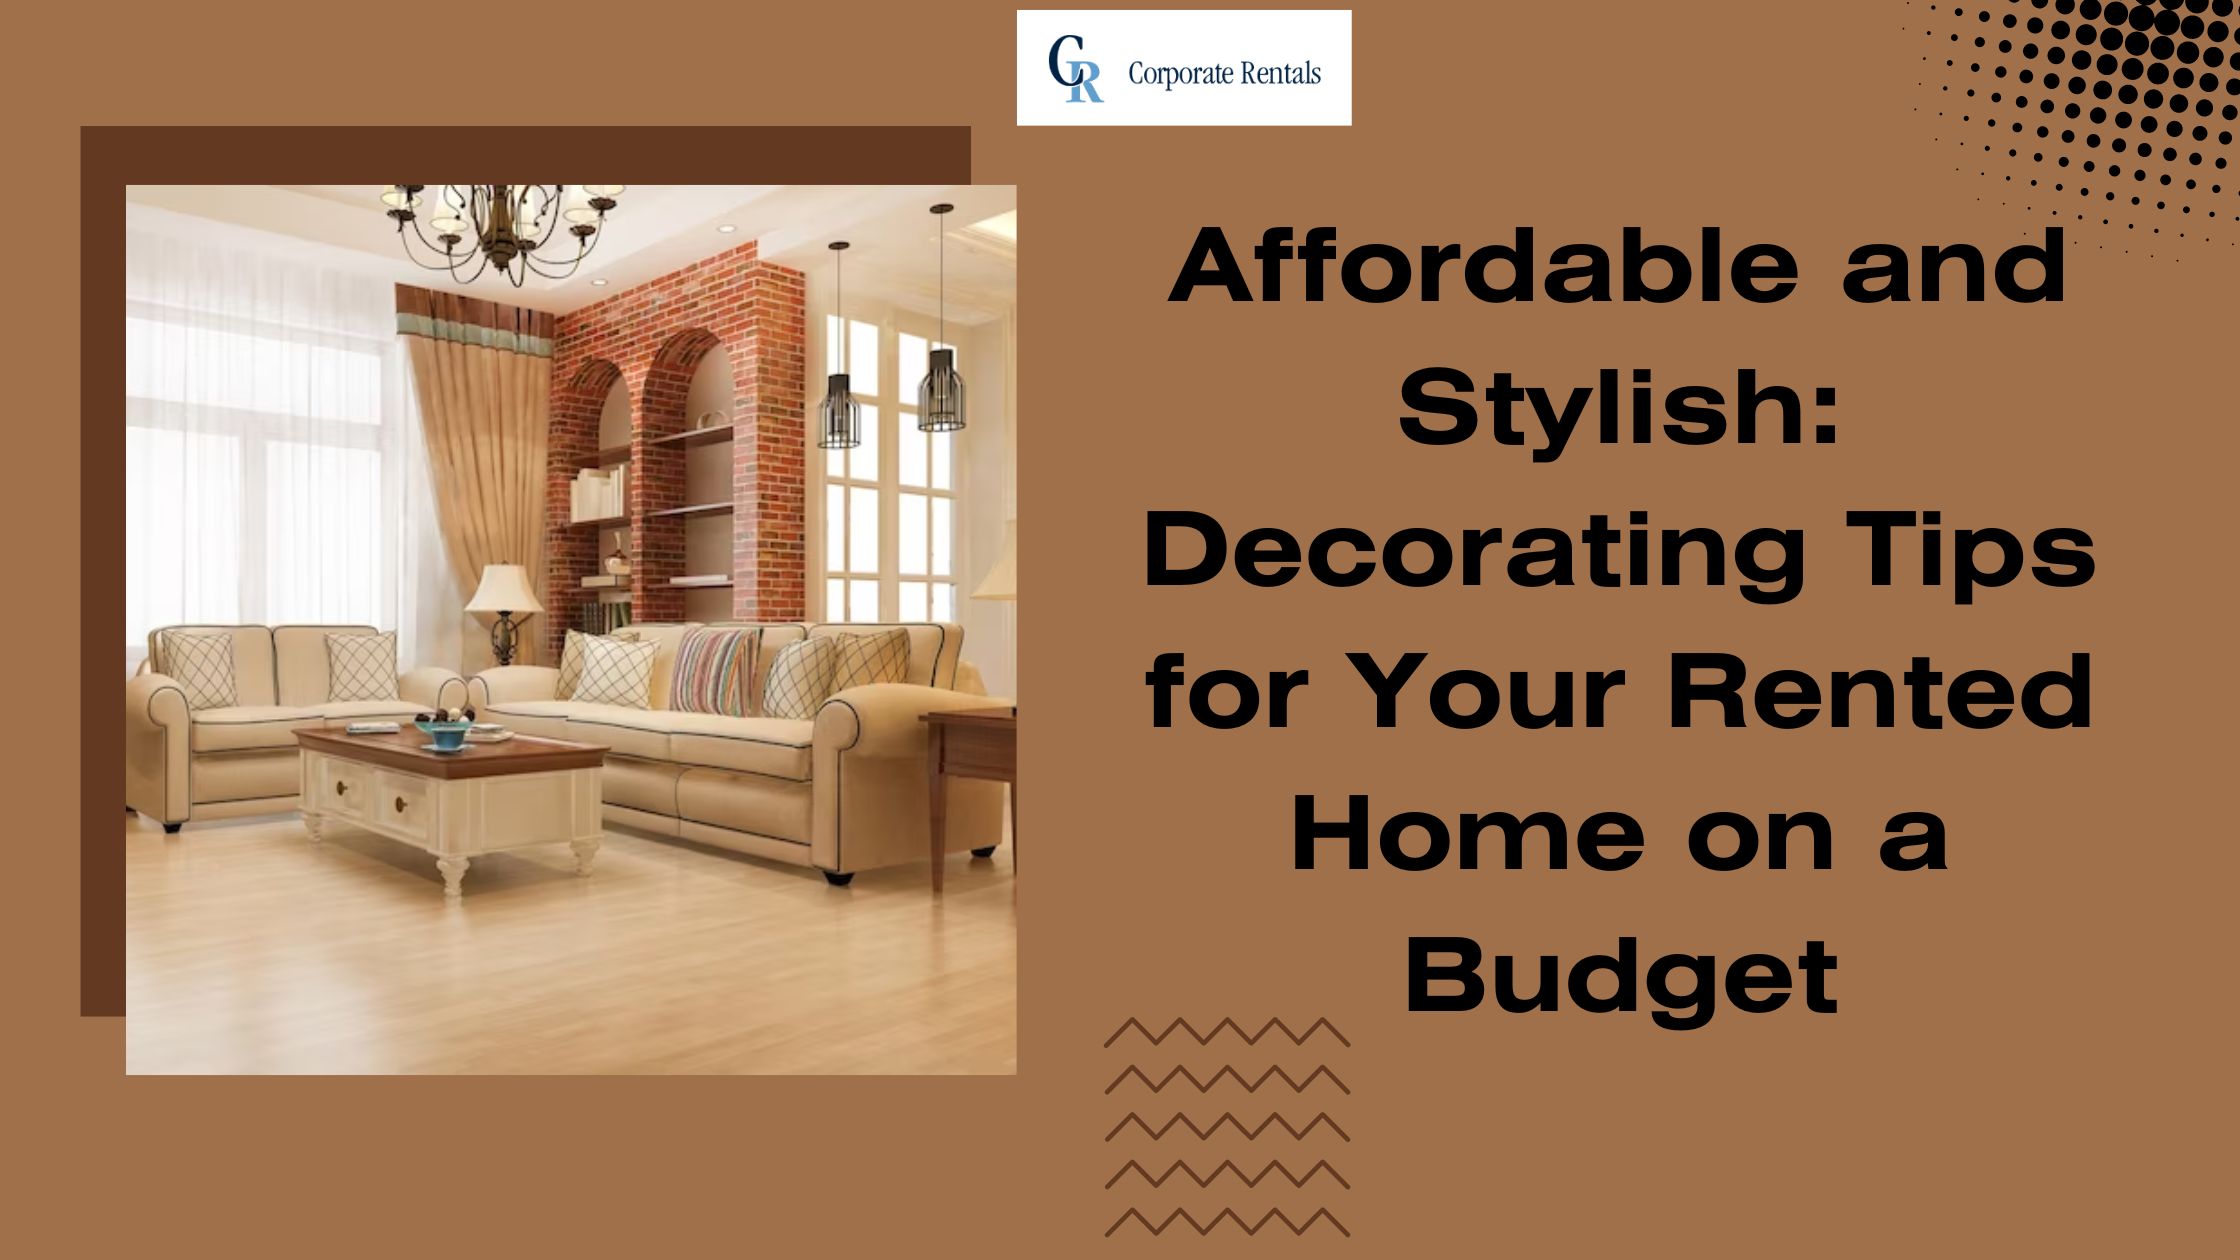 Affordable and Stylish: Decorating Tips for Your Rented Home on a Budget